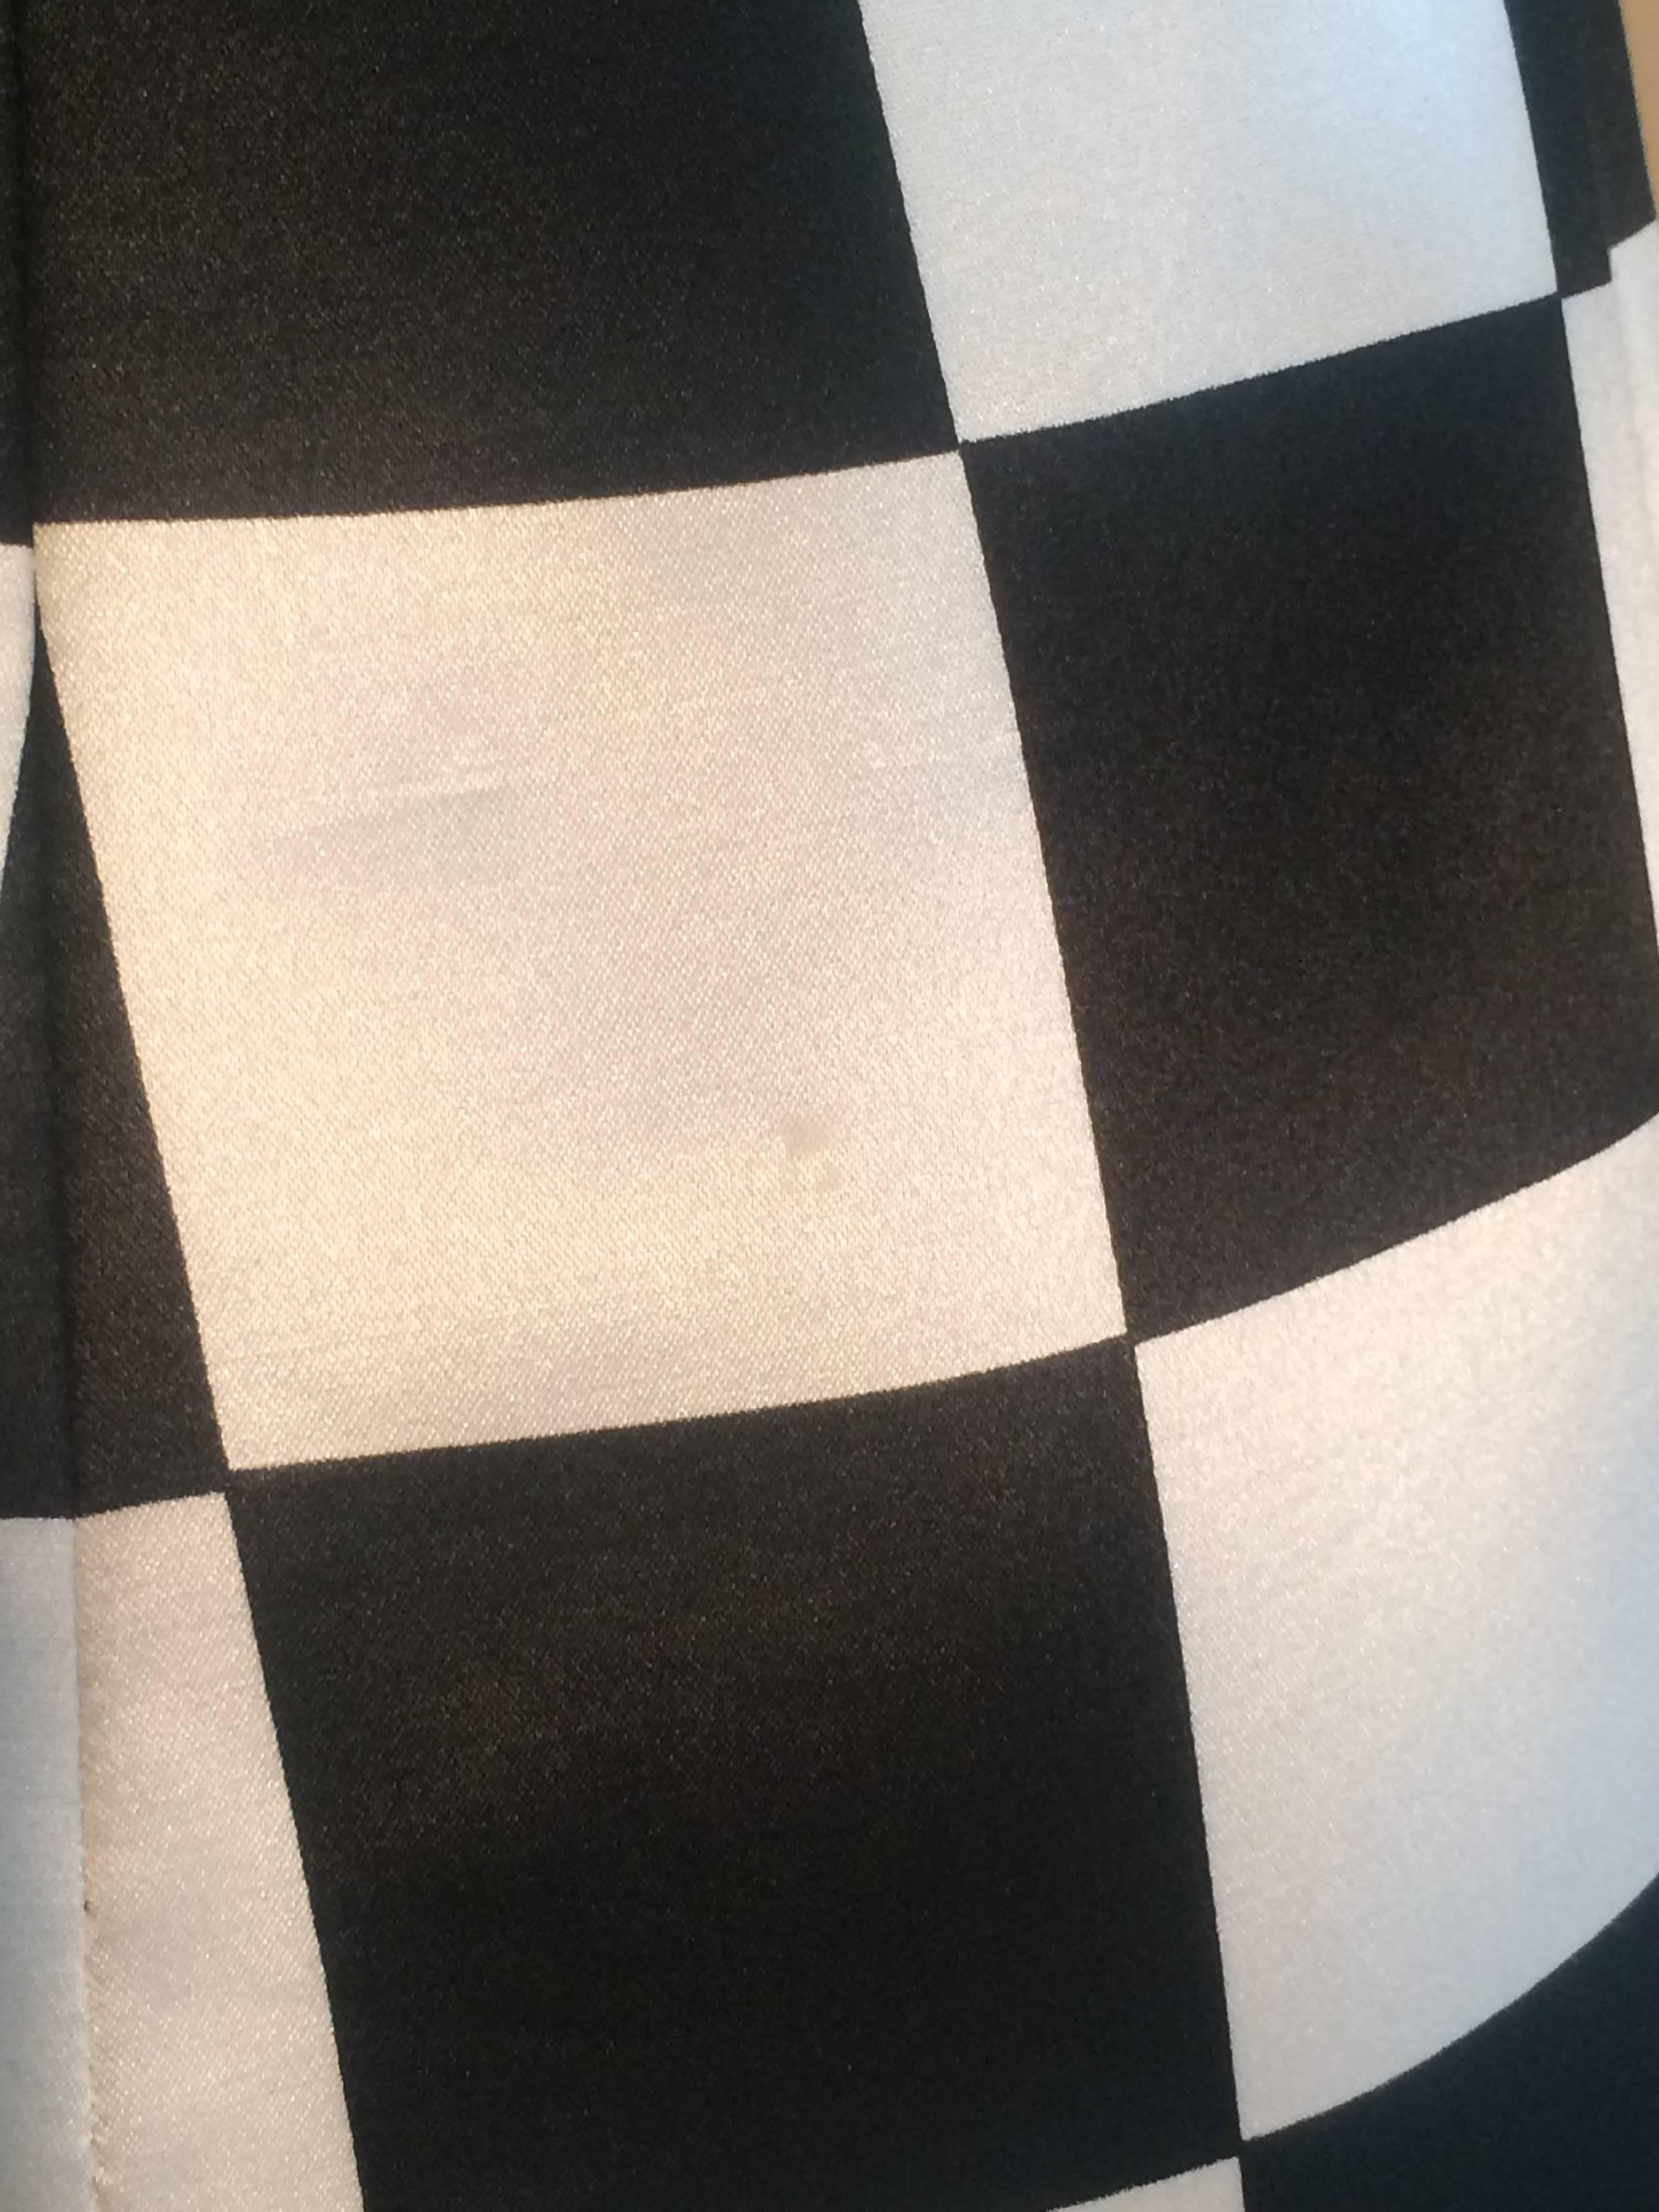 Gianni Versace Couture 1990s Black and White Checked Wiggle Dress 2